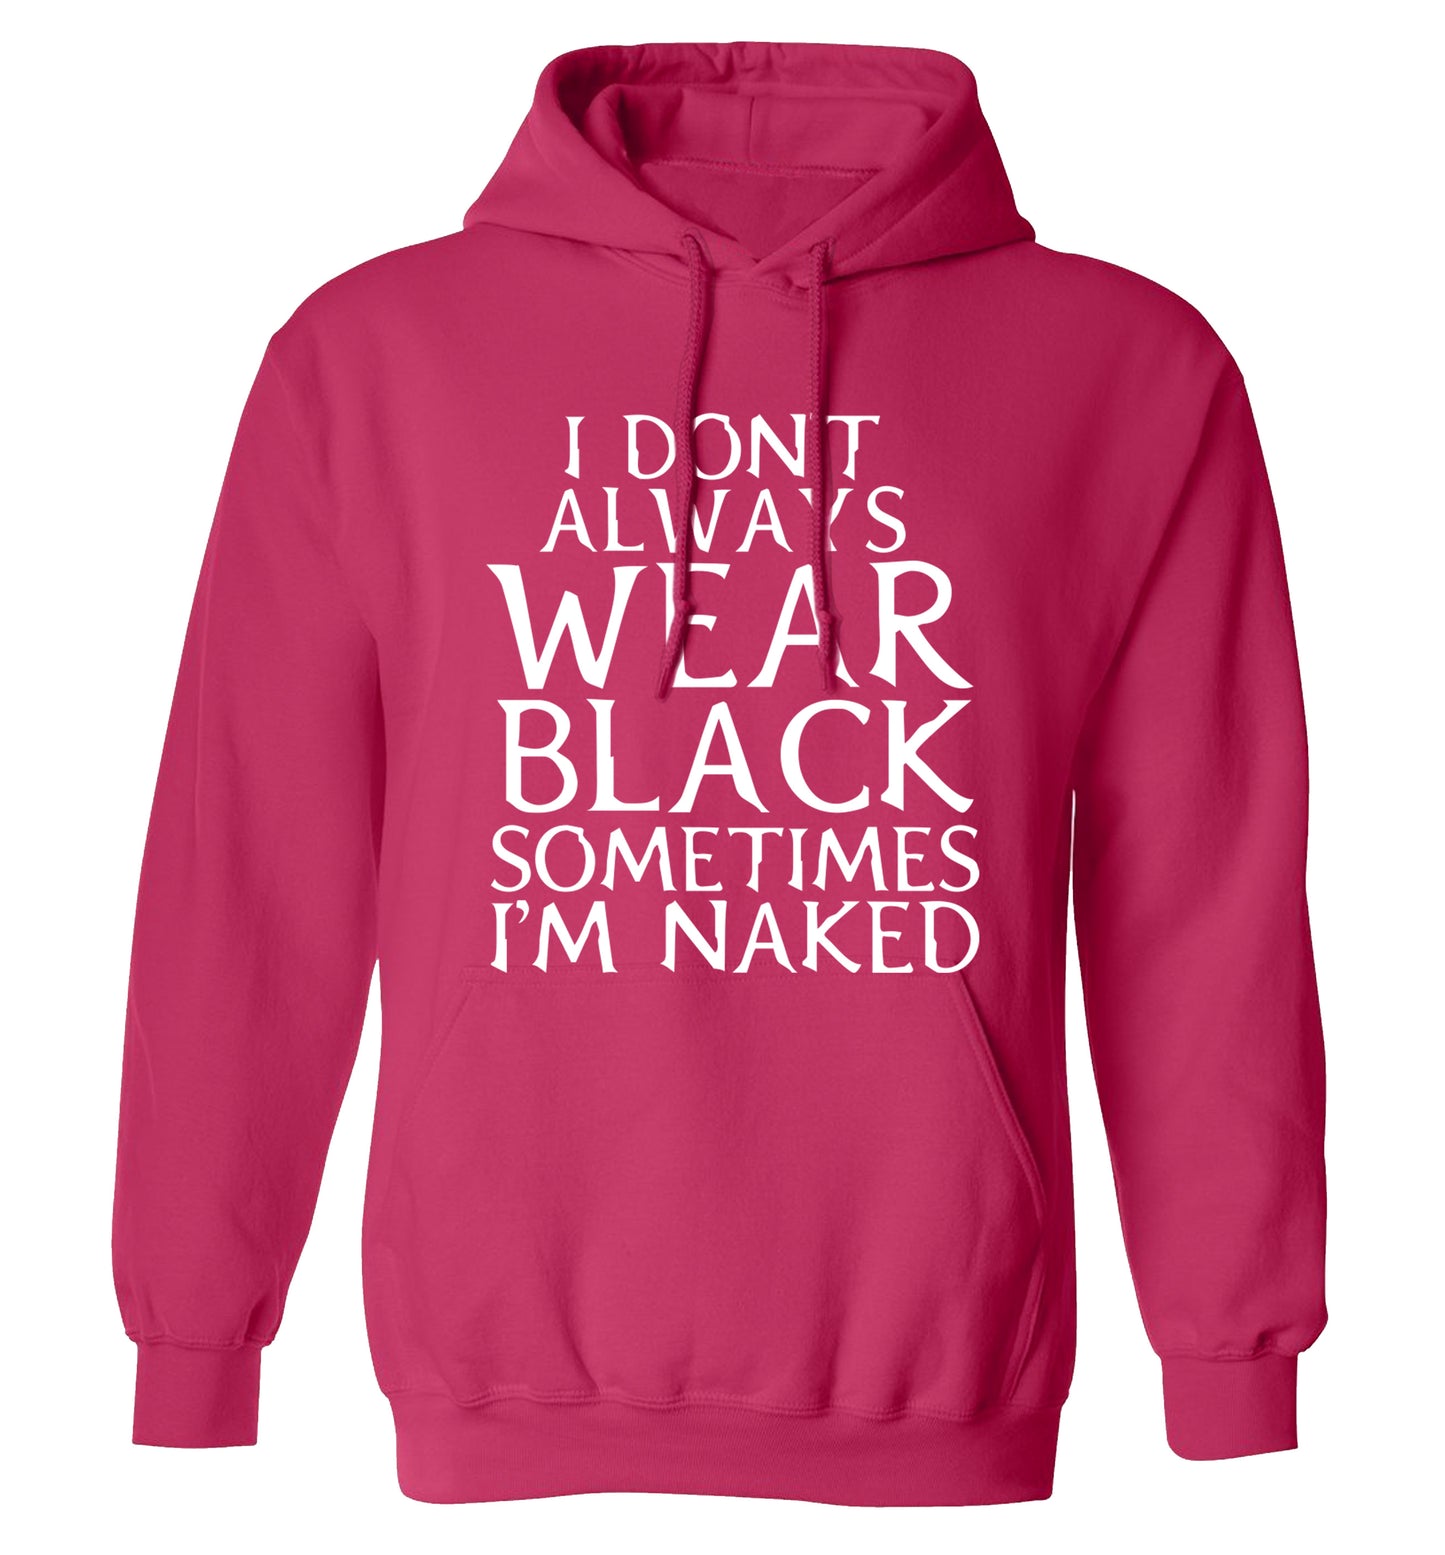 I don't always wear black sometimes I'm naked adults unisex pink hoodie 2XL